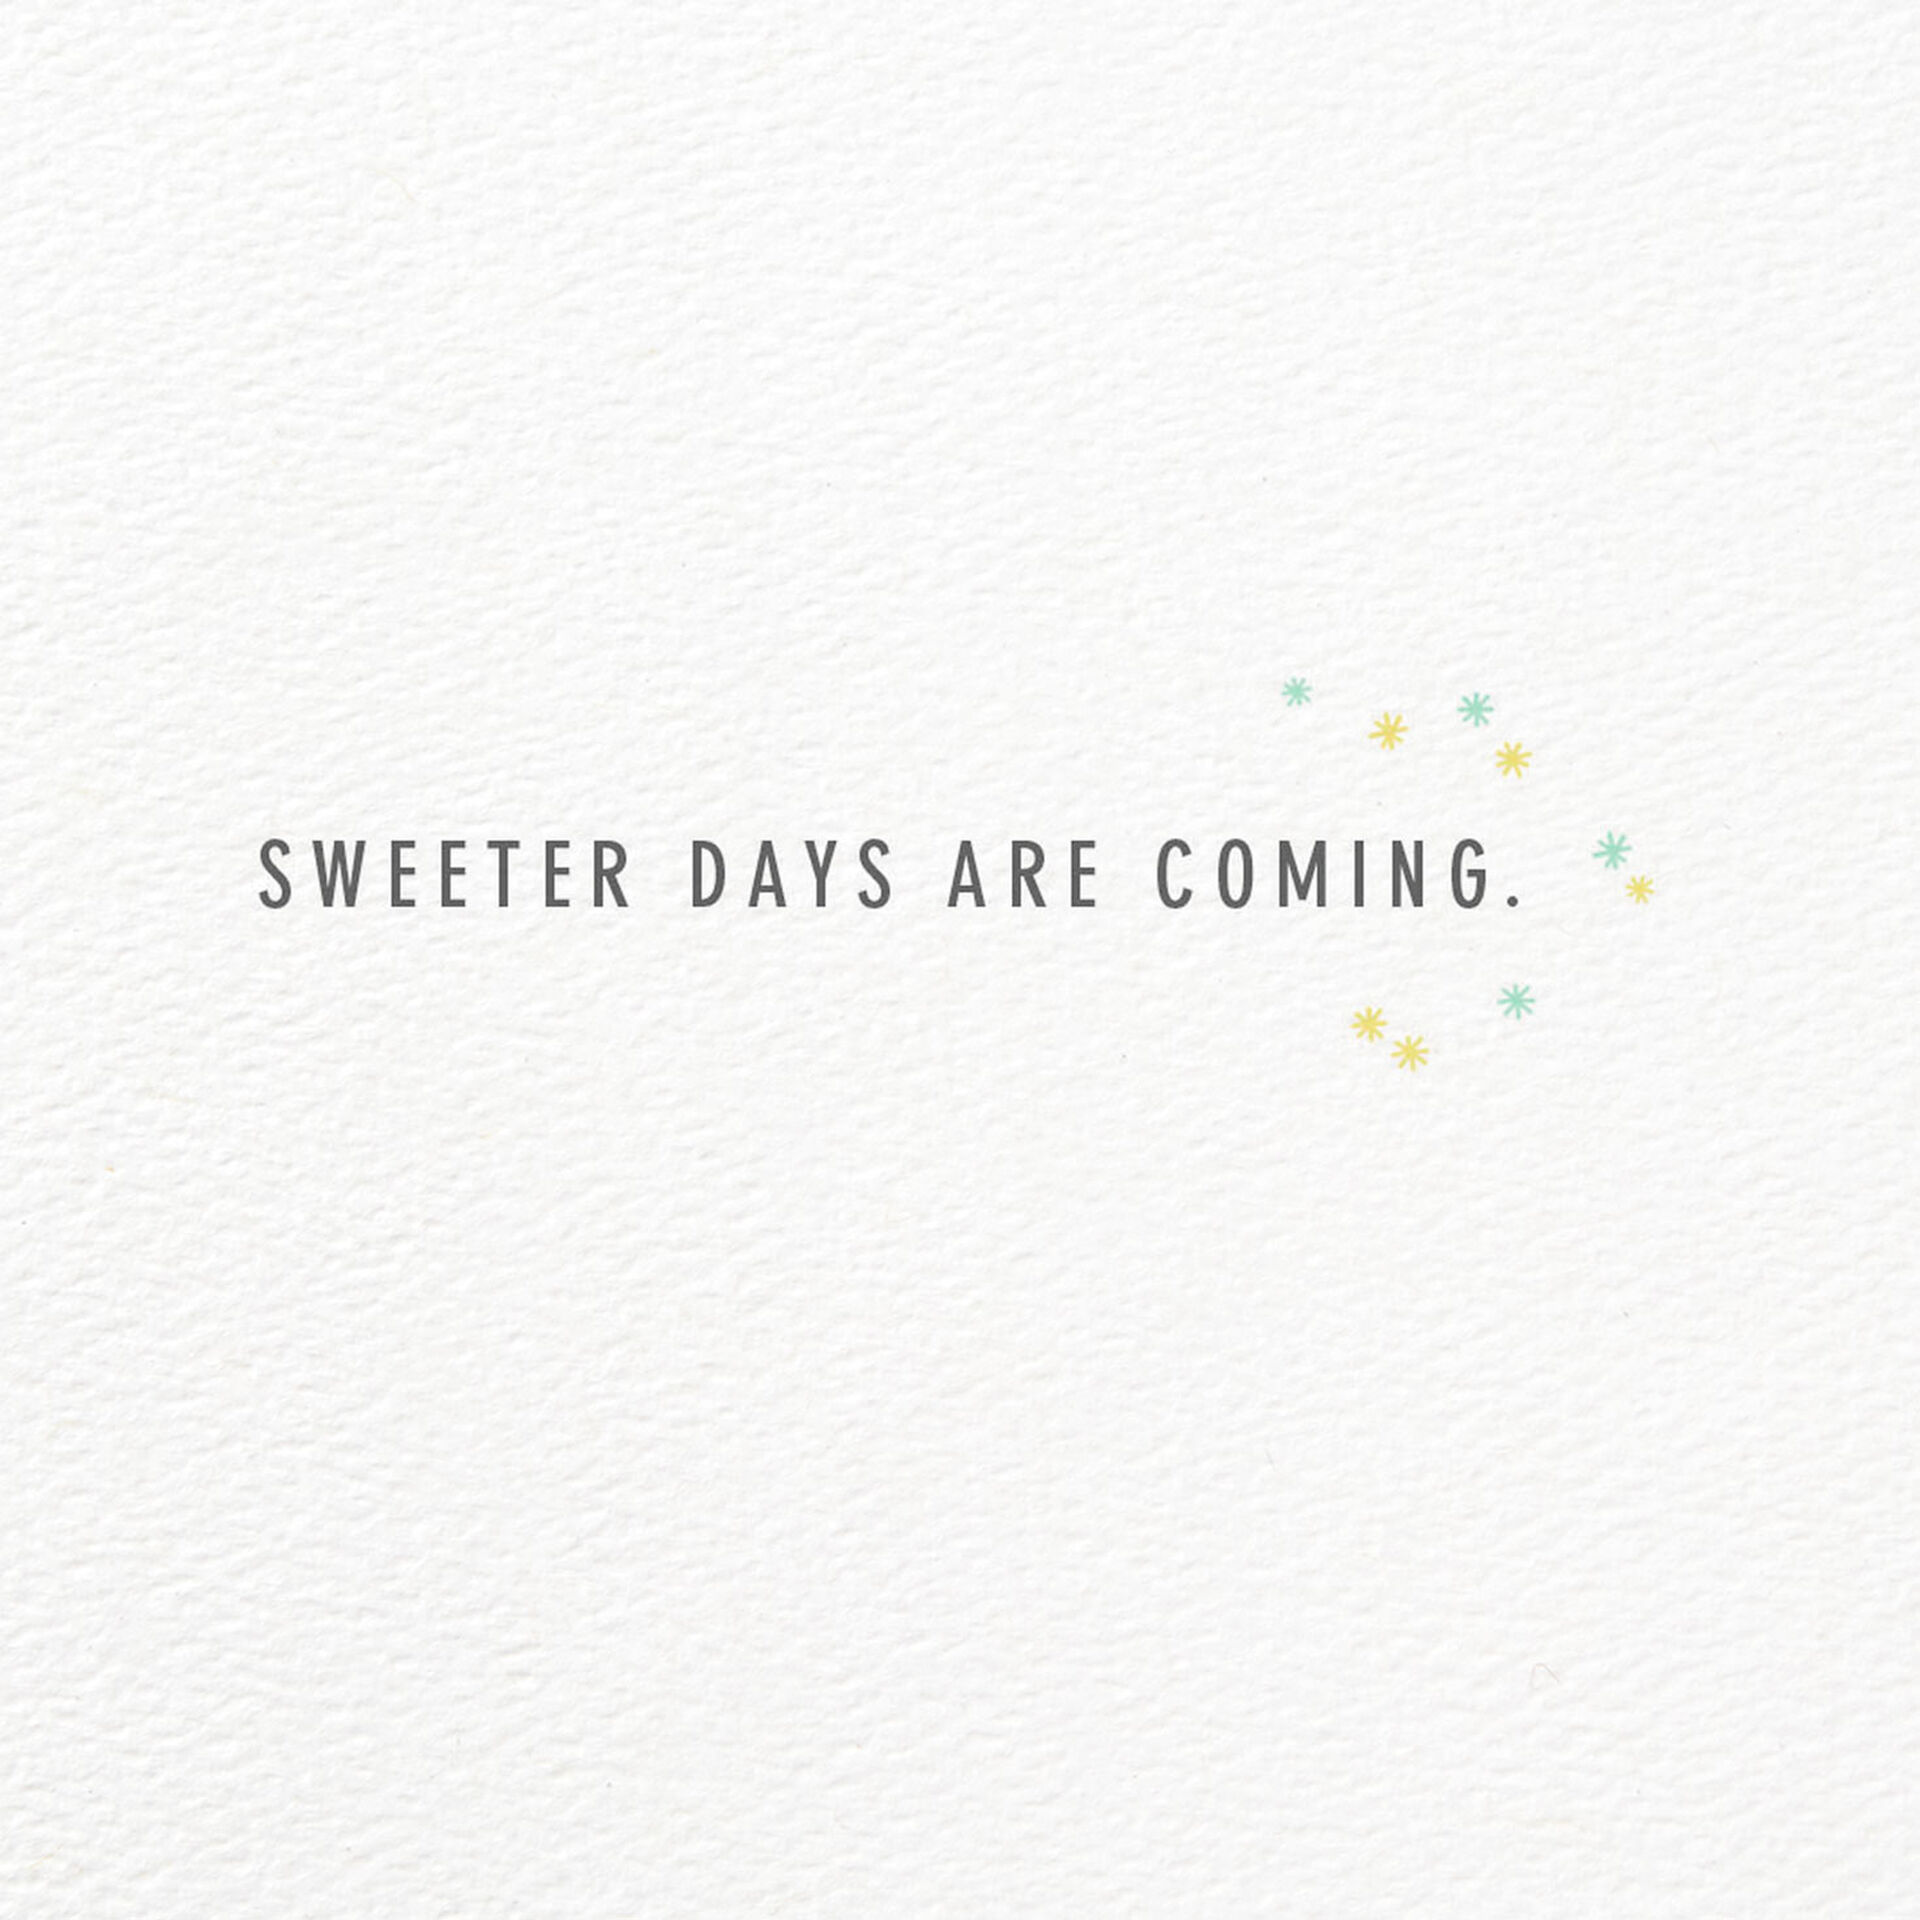 Lemons-Sweeter-Days-Are-Coming-Encouragement-Card_459HRD3016_02